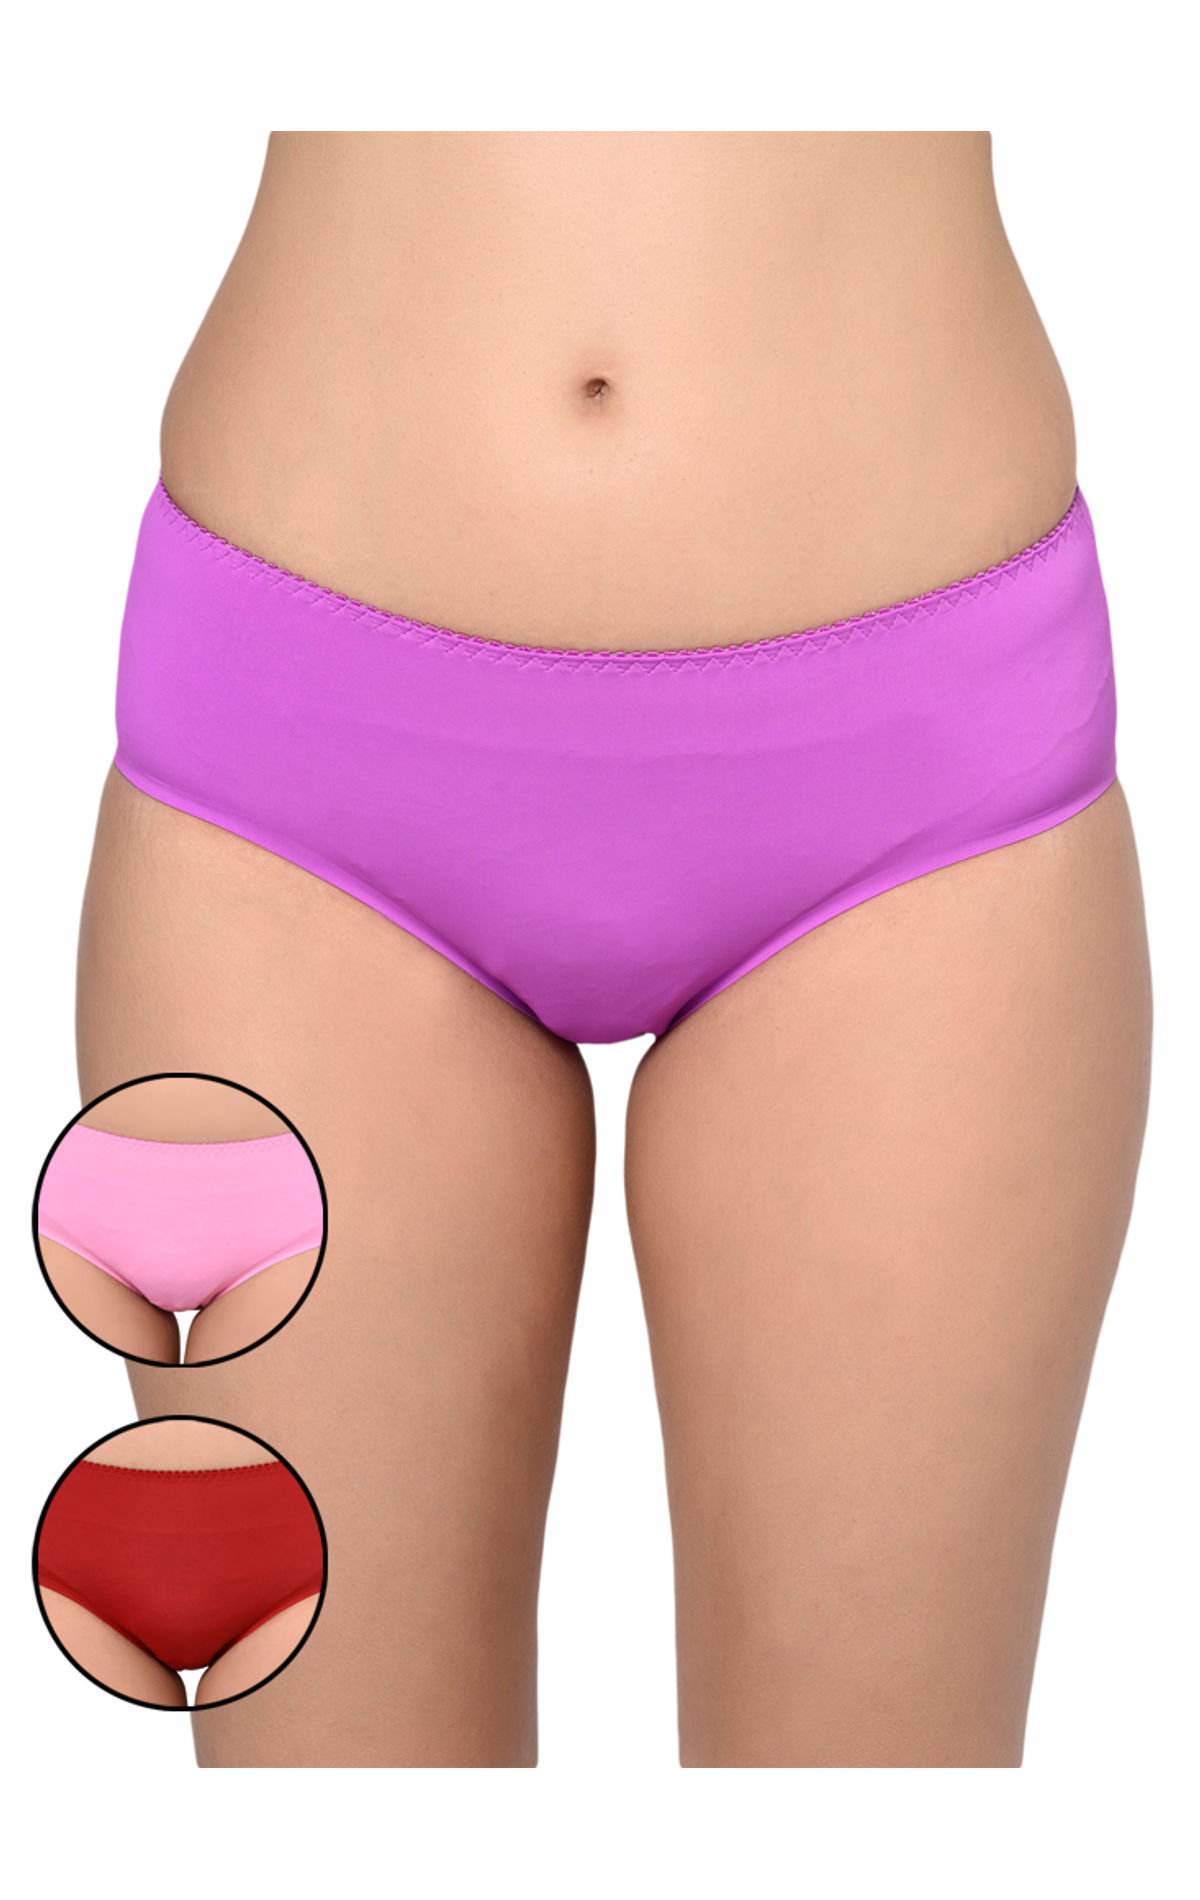 Bodycare Polyamide Invisibles Seamless 3pcs Hipsters Panty Pack In